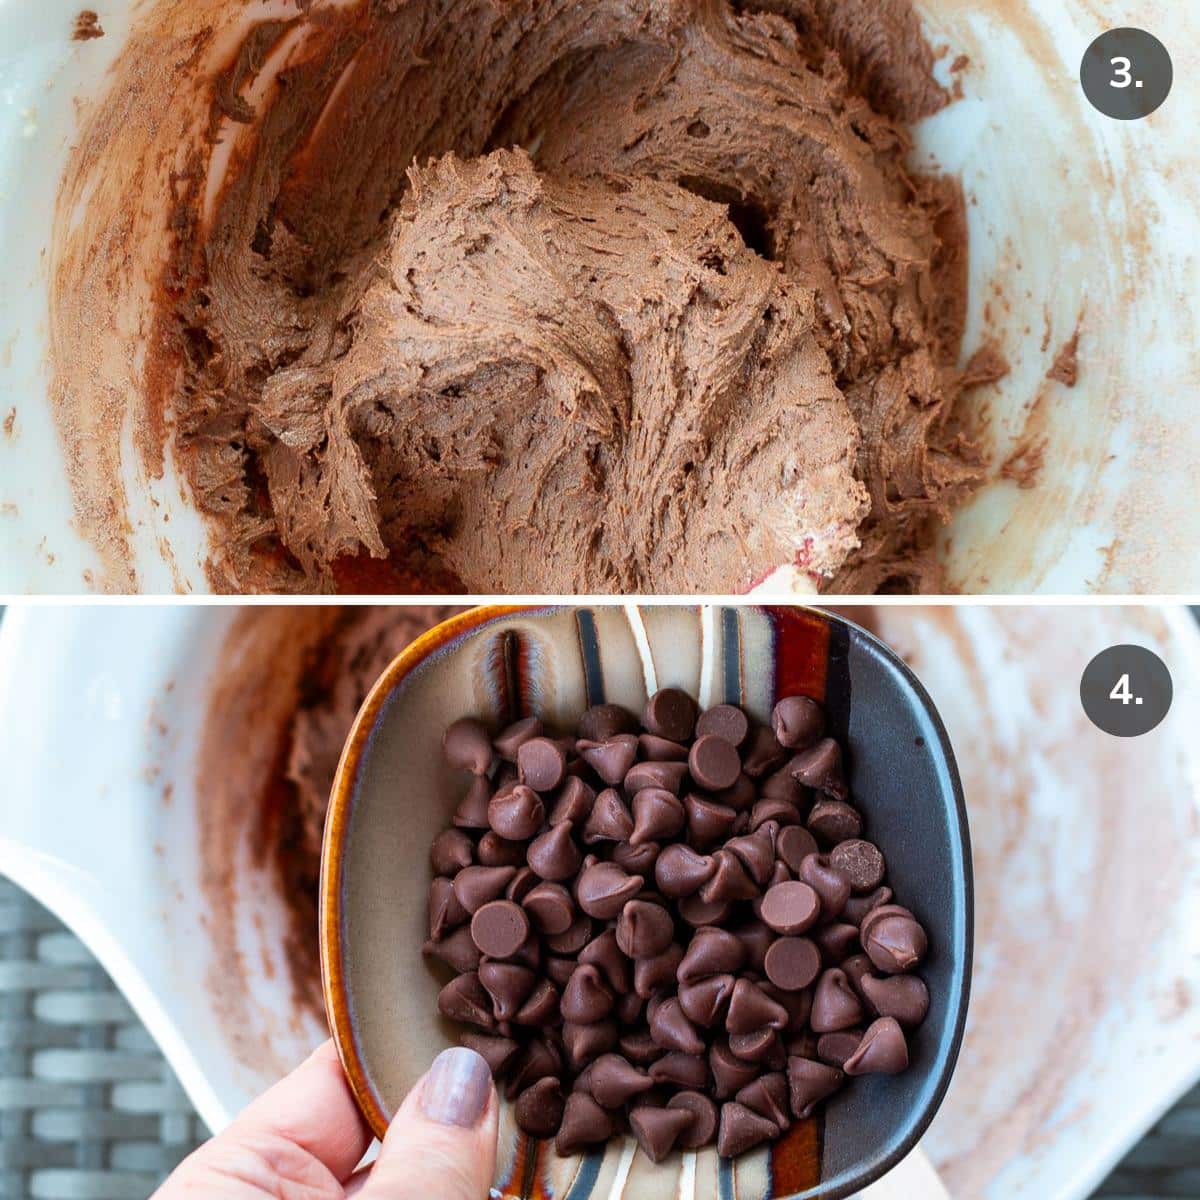 Chocolate cookie dough getting vegan chocolate chips added. 